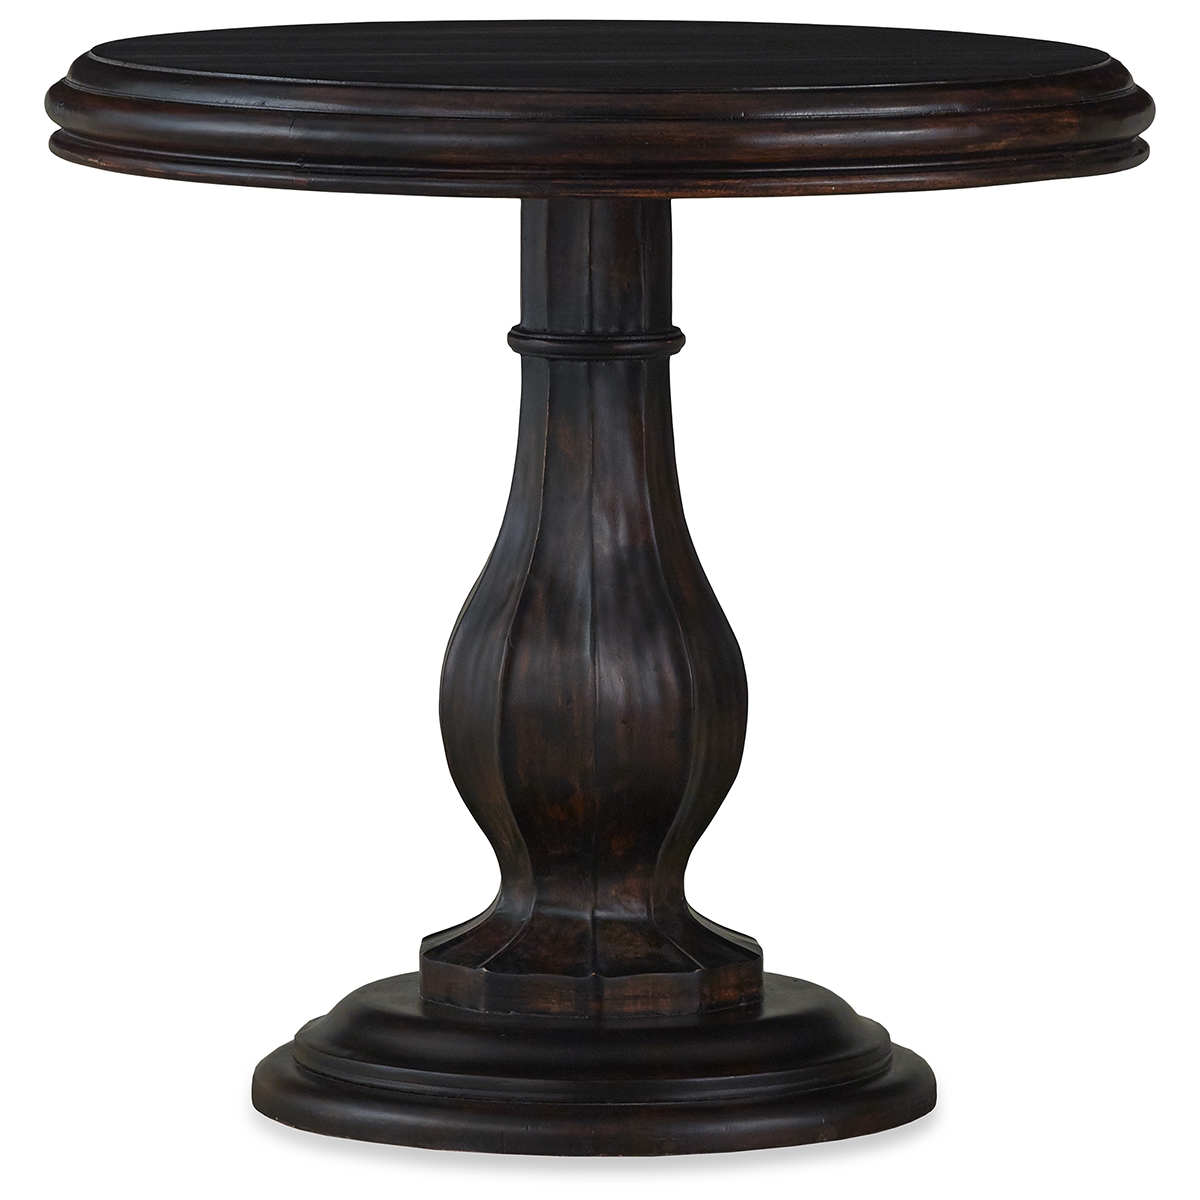 french quarter vintage black side table round pedestal accent vdk antique bramble mahogany larger email friend pink tiffany style lamp west elm mirror low marble coffee large top